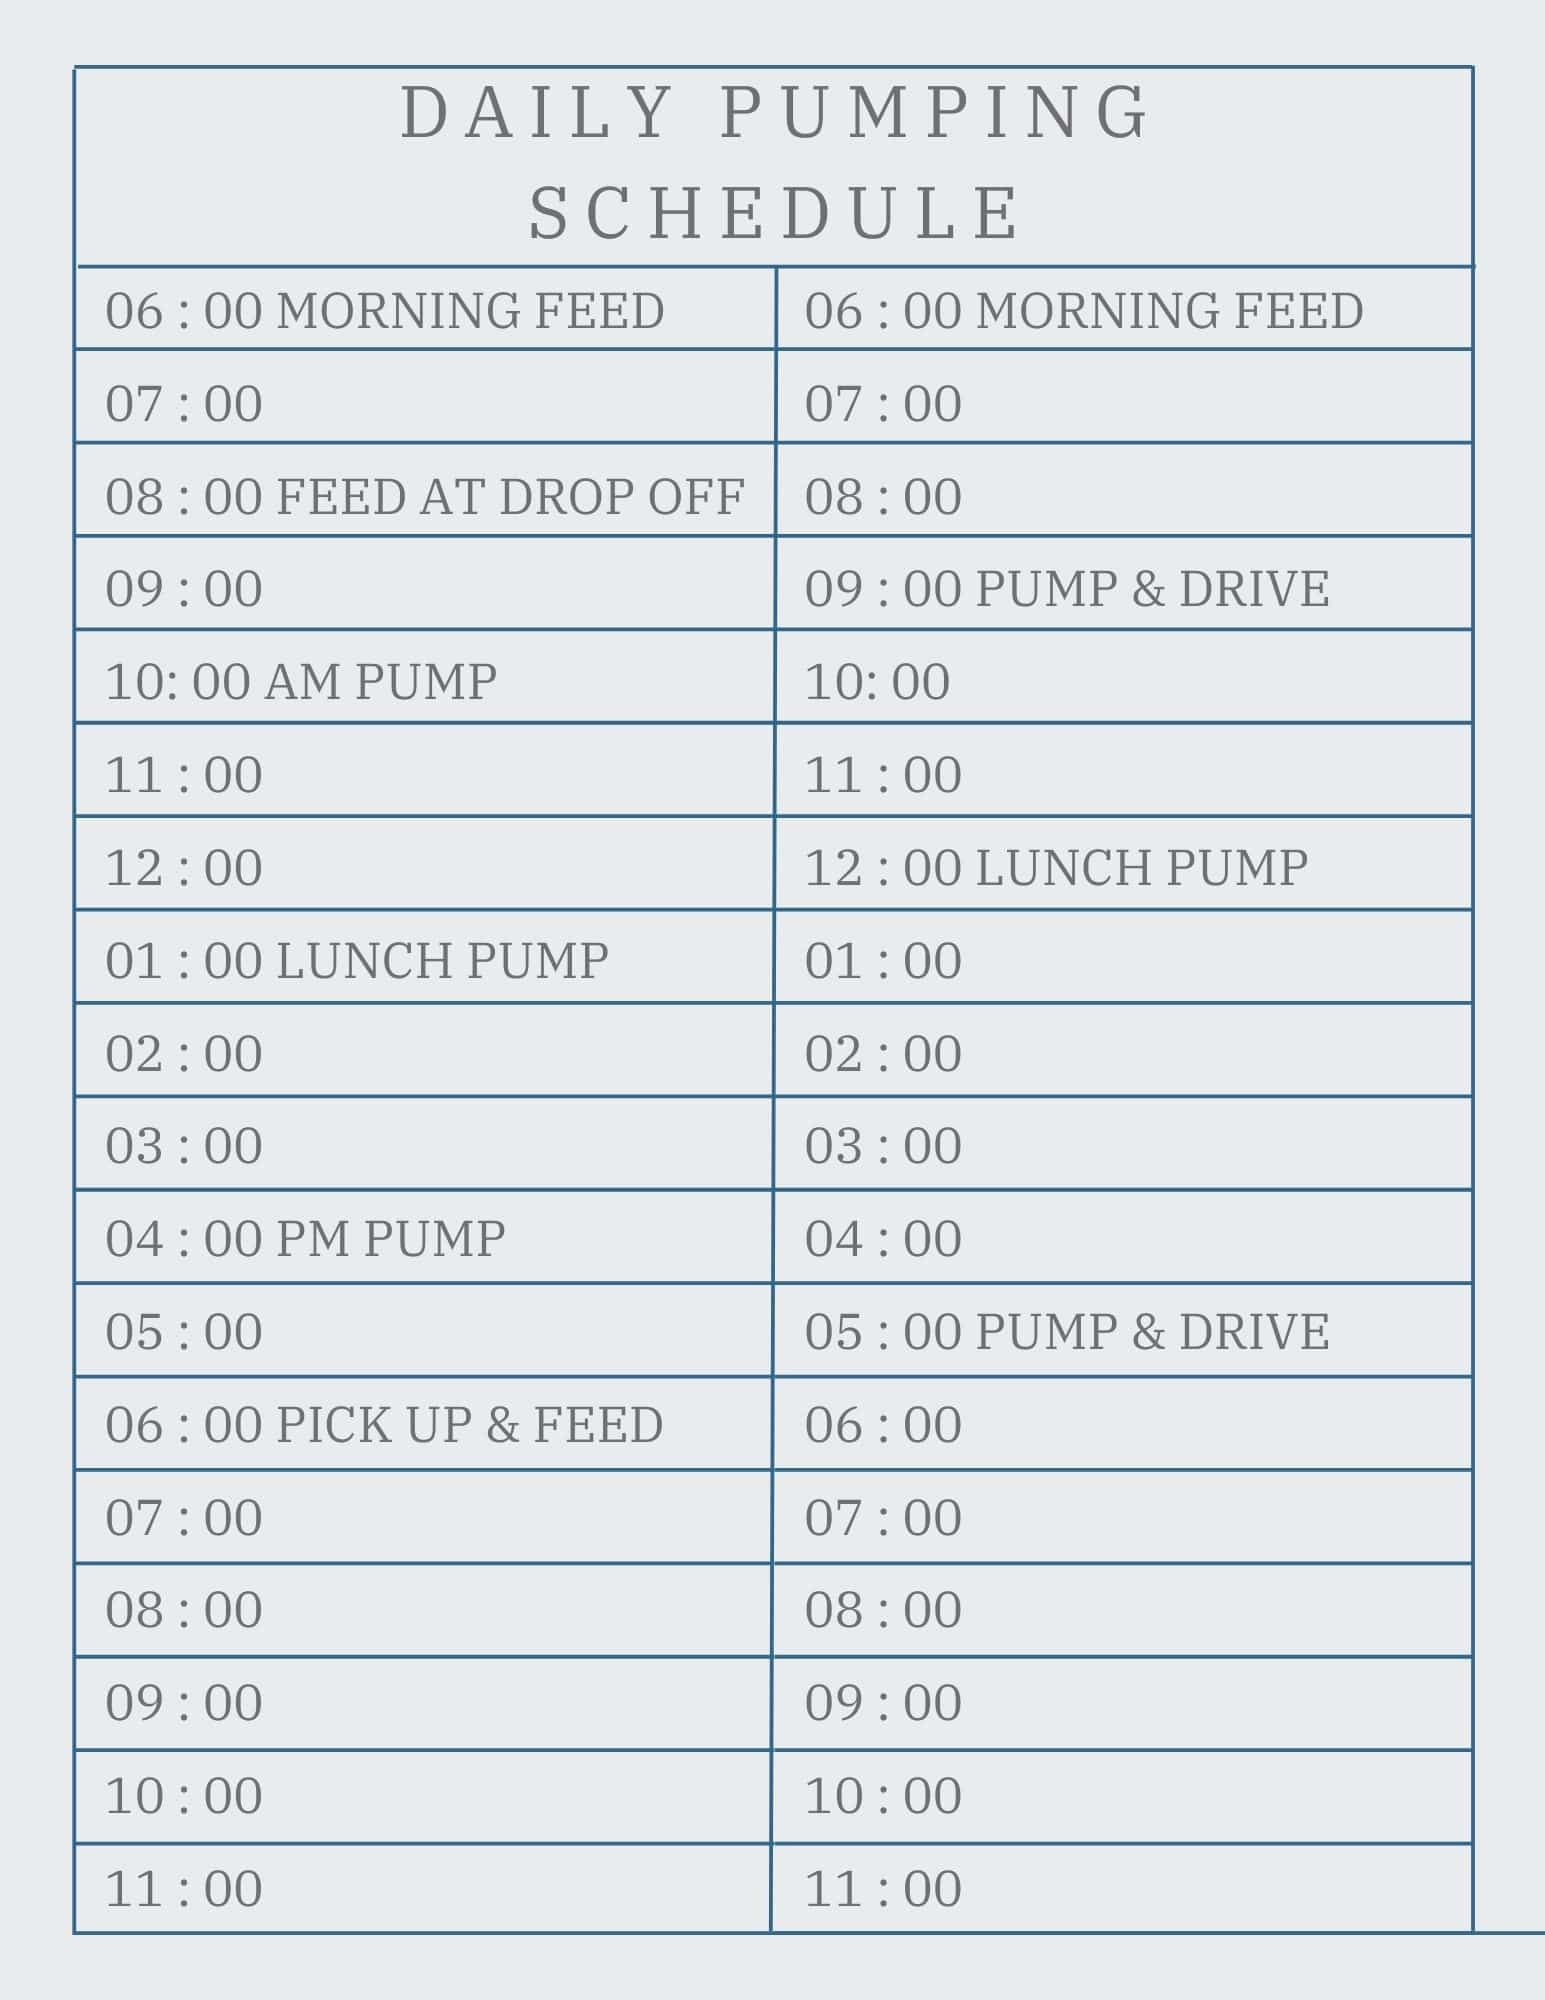 2 pumping schedule options, on one side is a more traditional schedule with options every 2-3 hours and feeding at drop off and pick up. The left has a less ideal schedule requiring pumping in the car and only a lunch break pumping session.